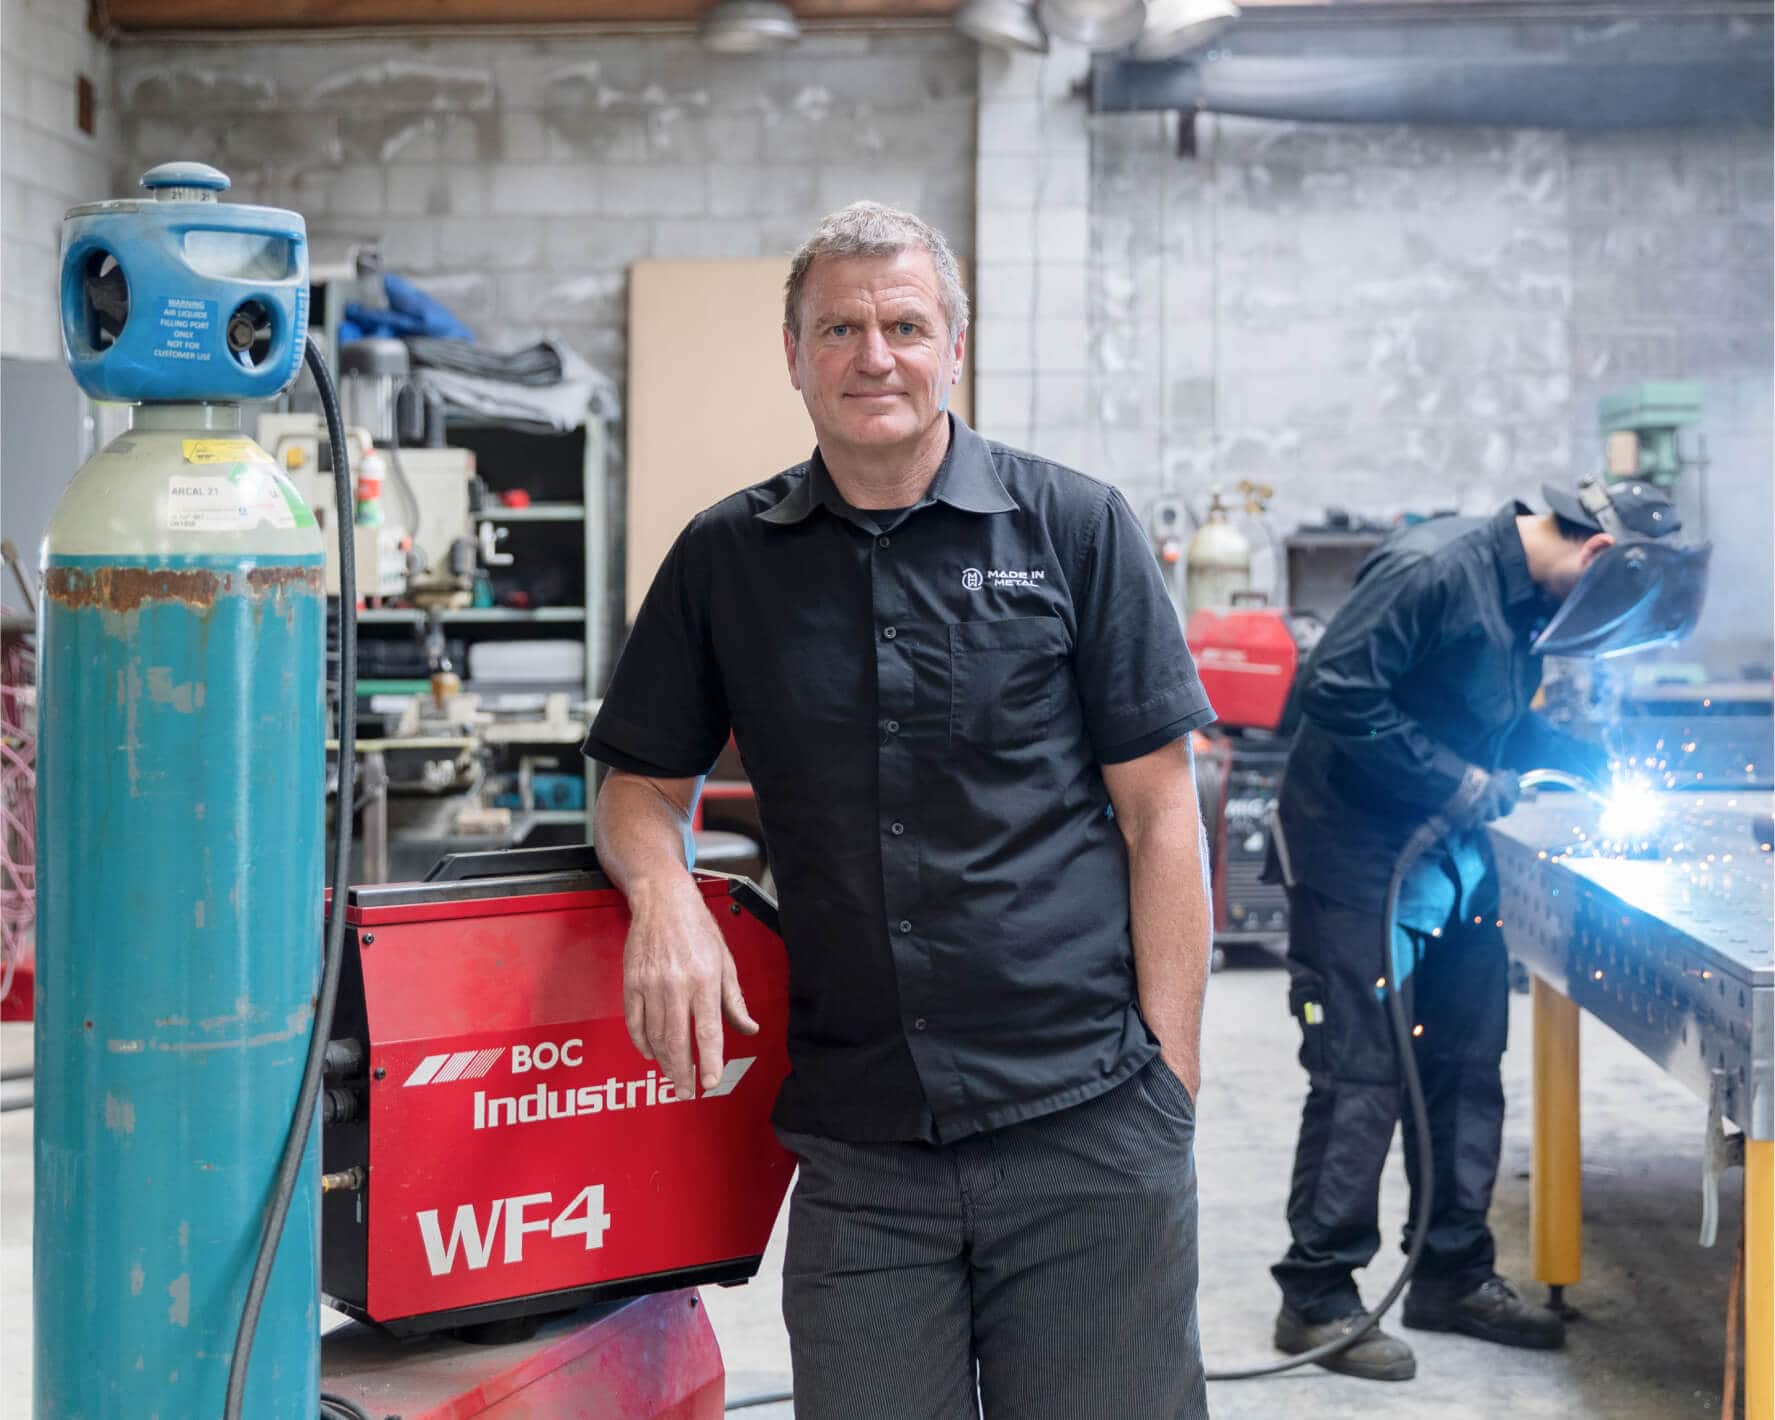 An industrial manufacturer who uses Xero accounting software and his team weld components.